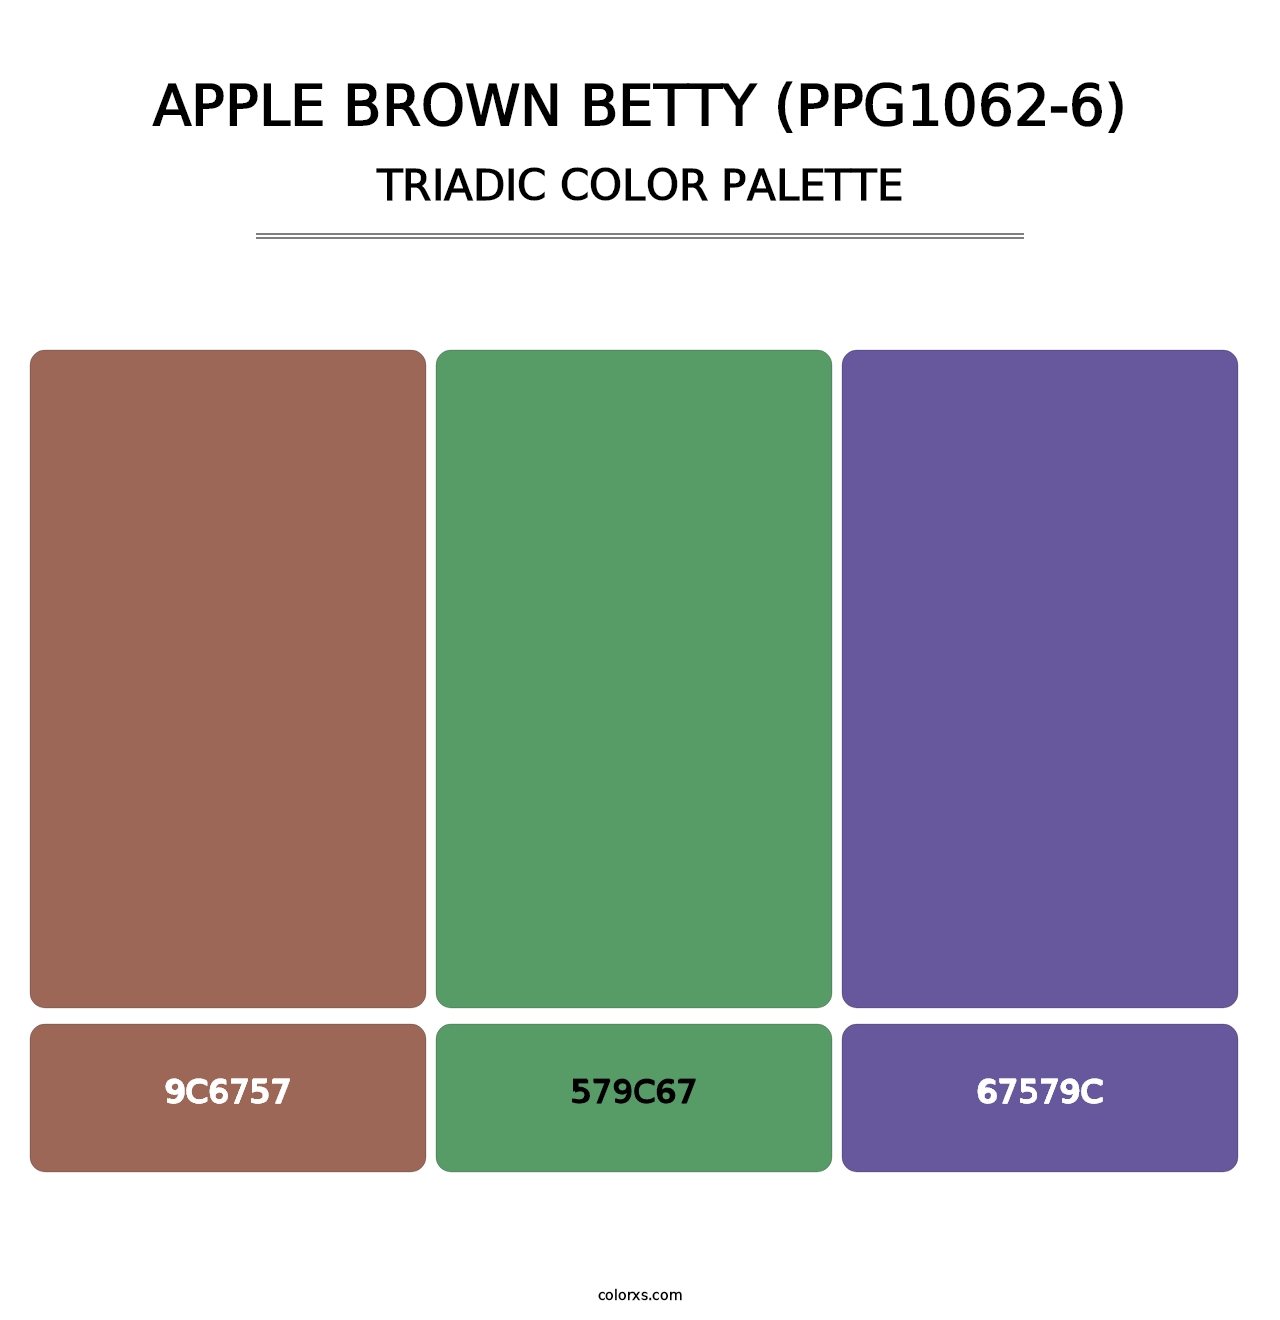 Apple Brown Betty (PPG1062-6) - Triadic Color Palette